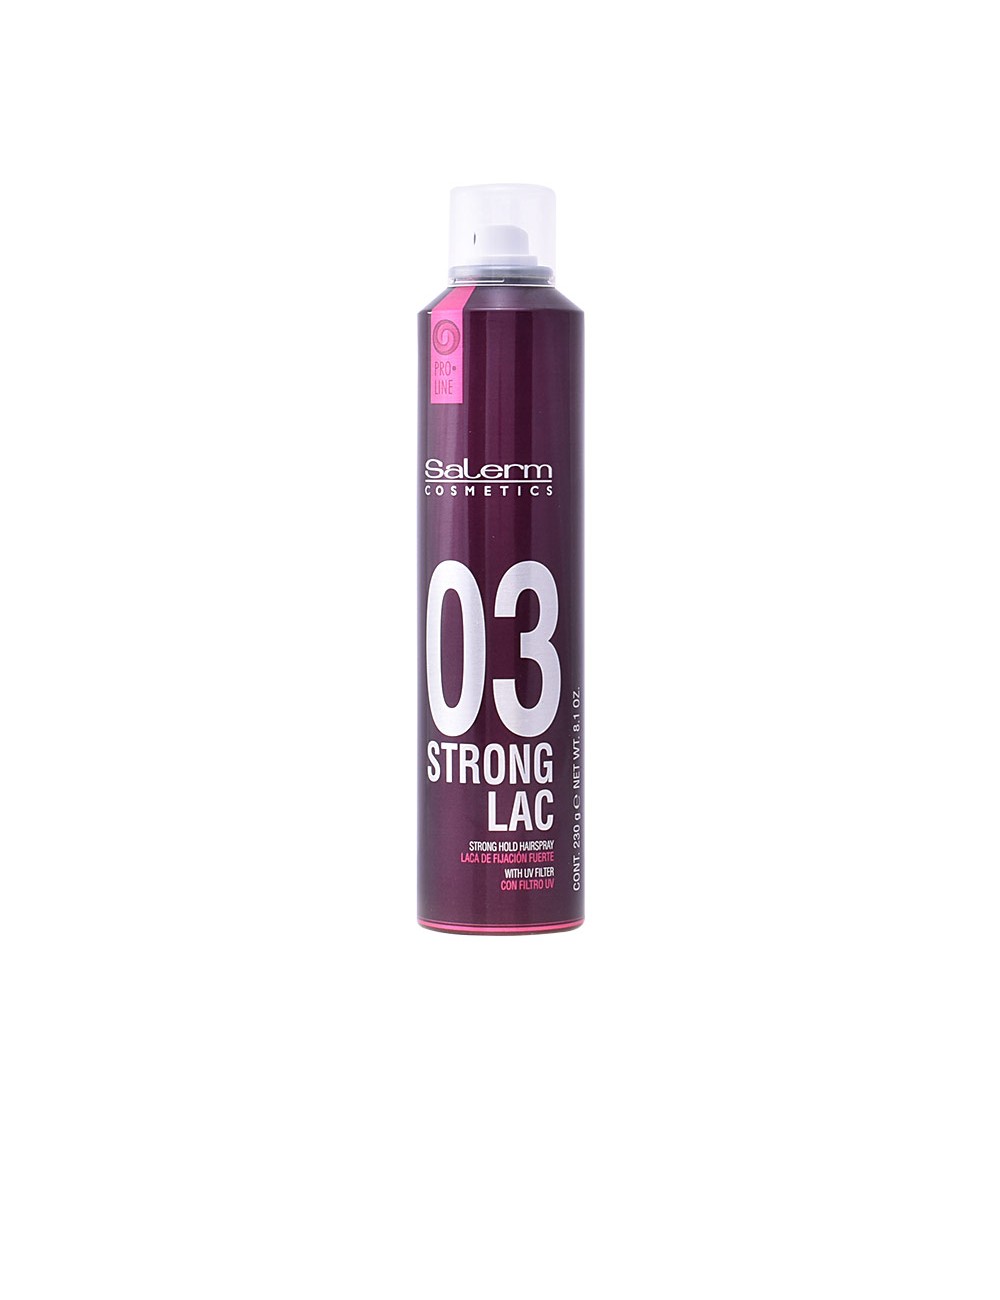 STRONG LAC 03 strong hold spray 405 ml